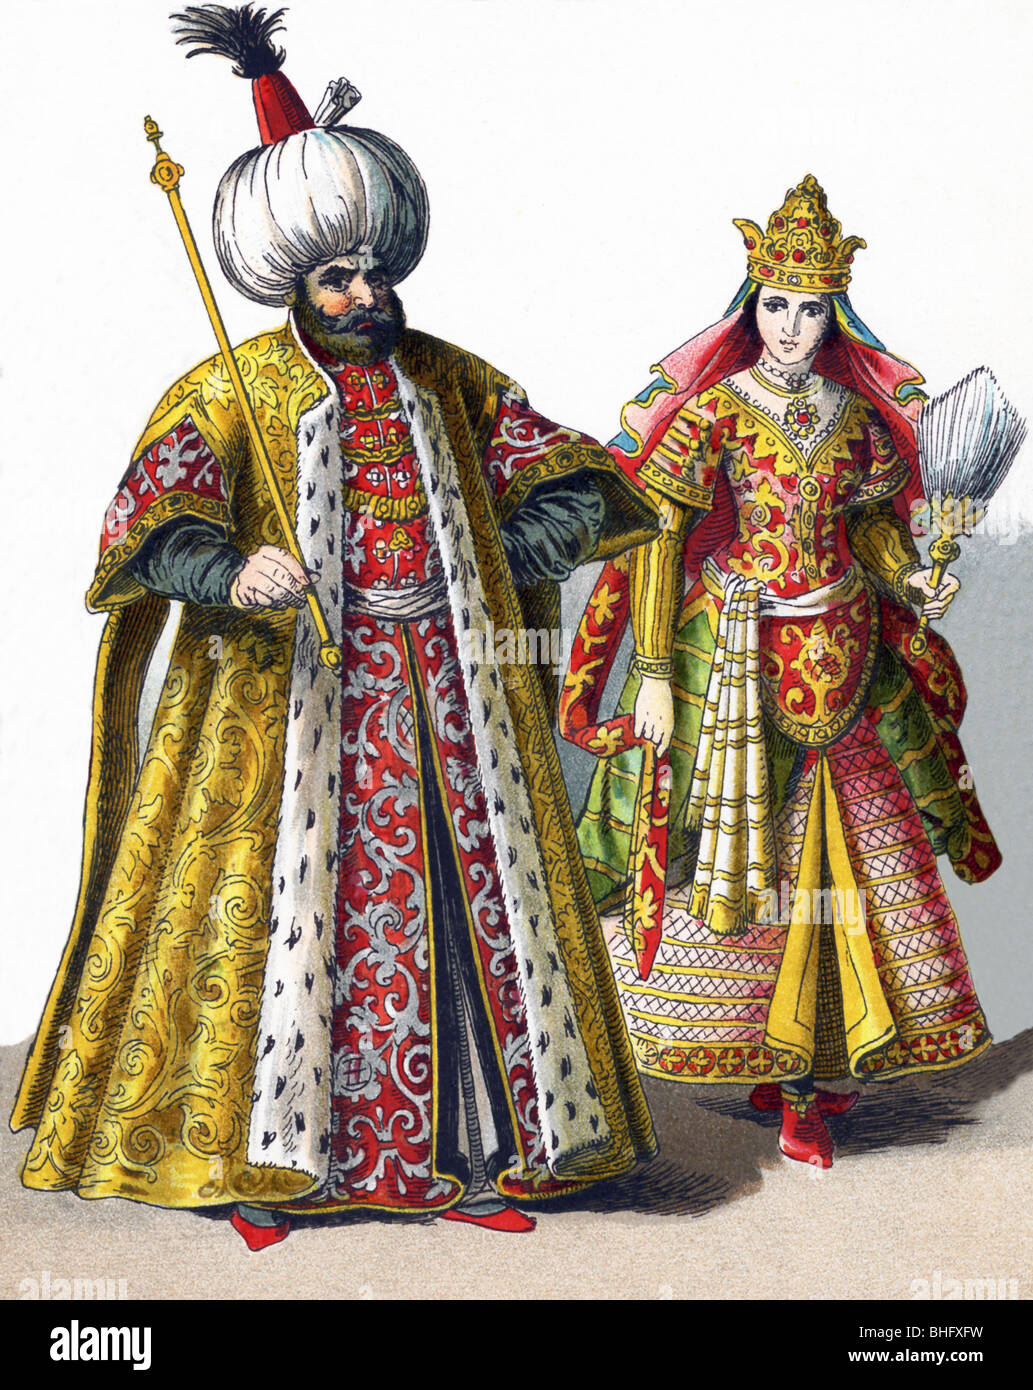 These figures represent a Sultan and a Sultana in the Ottoman Empire in 1500. Stock Photo